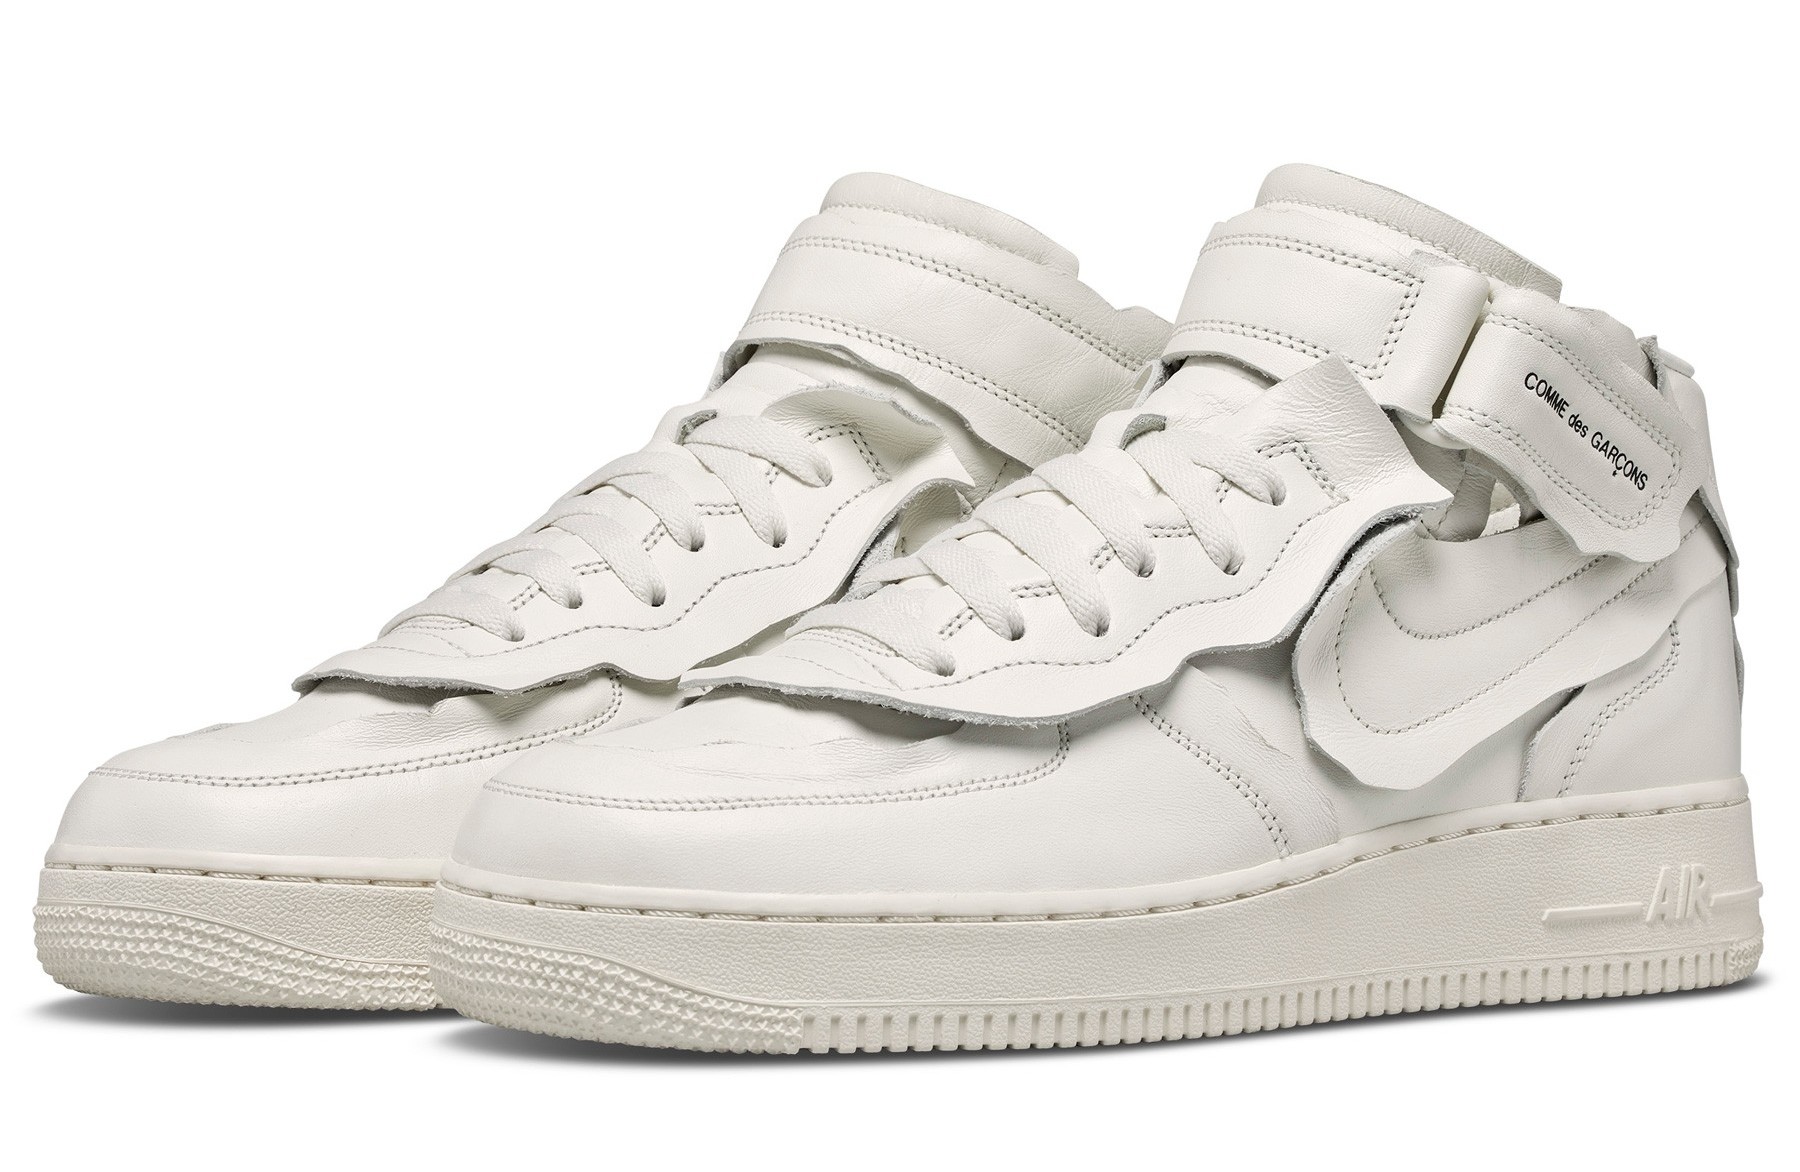 Comme des Garcons' Nike Air Force 1 Mid Collabs Are Dropping Soon